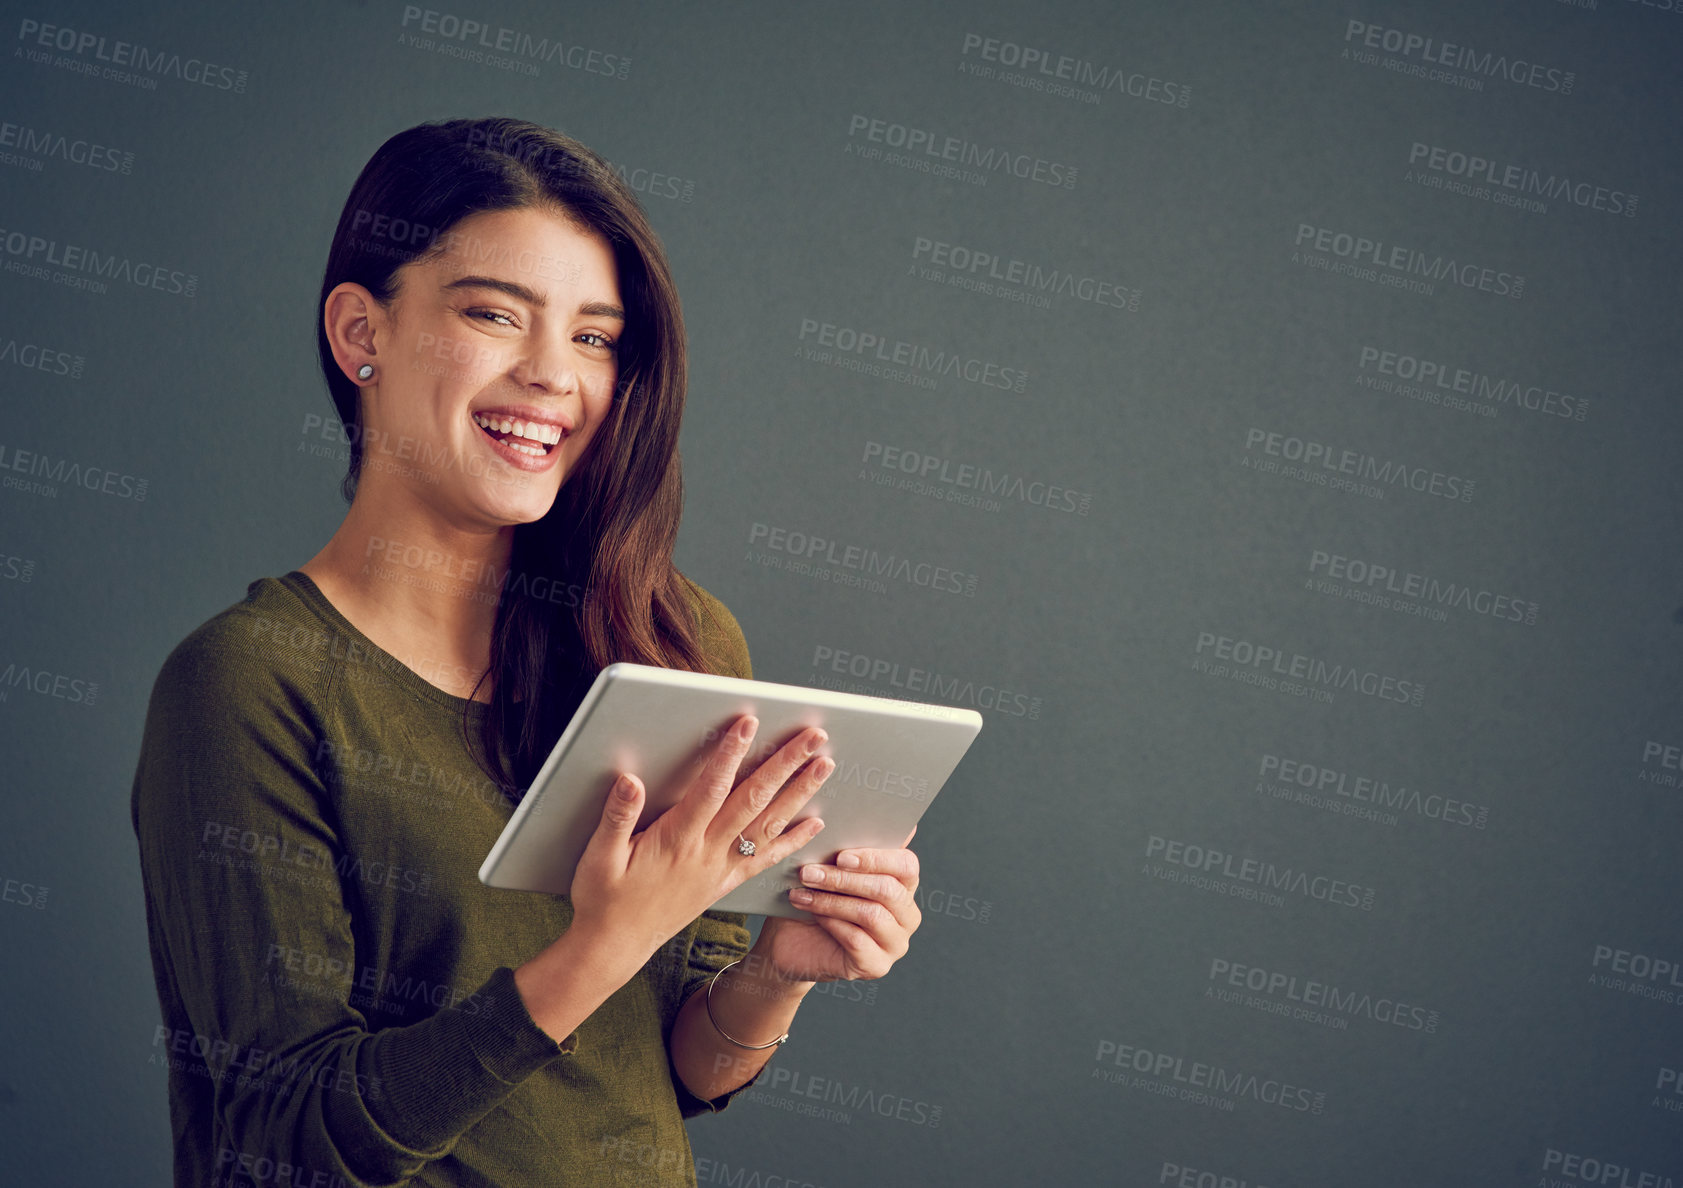 Buy stock photo Studio shot of an cheerful young woman holding a digital tablet while standing against a dark background